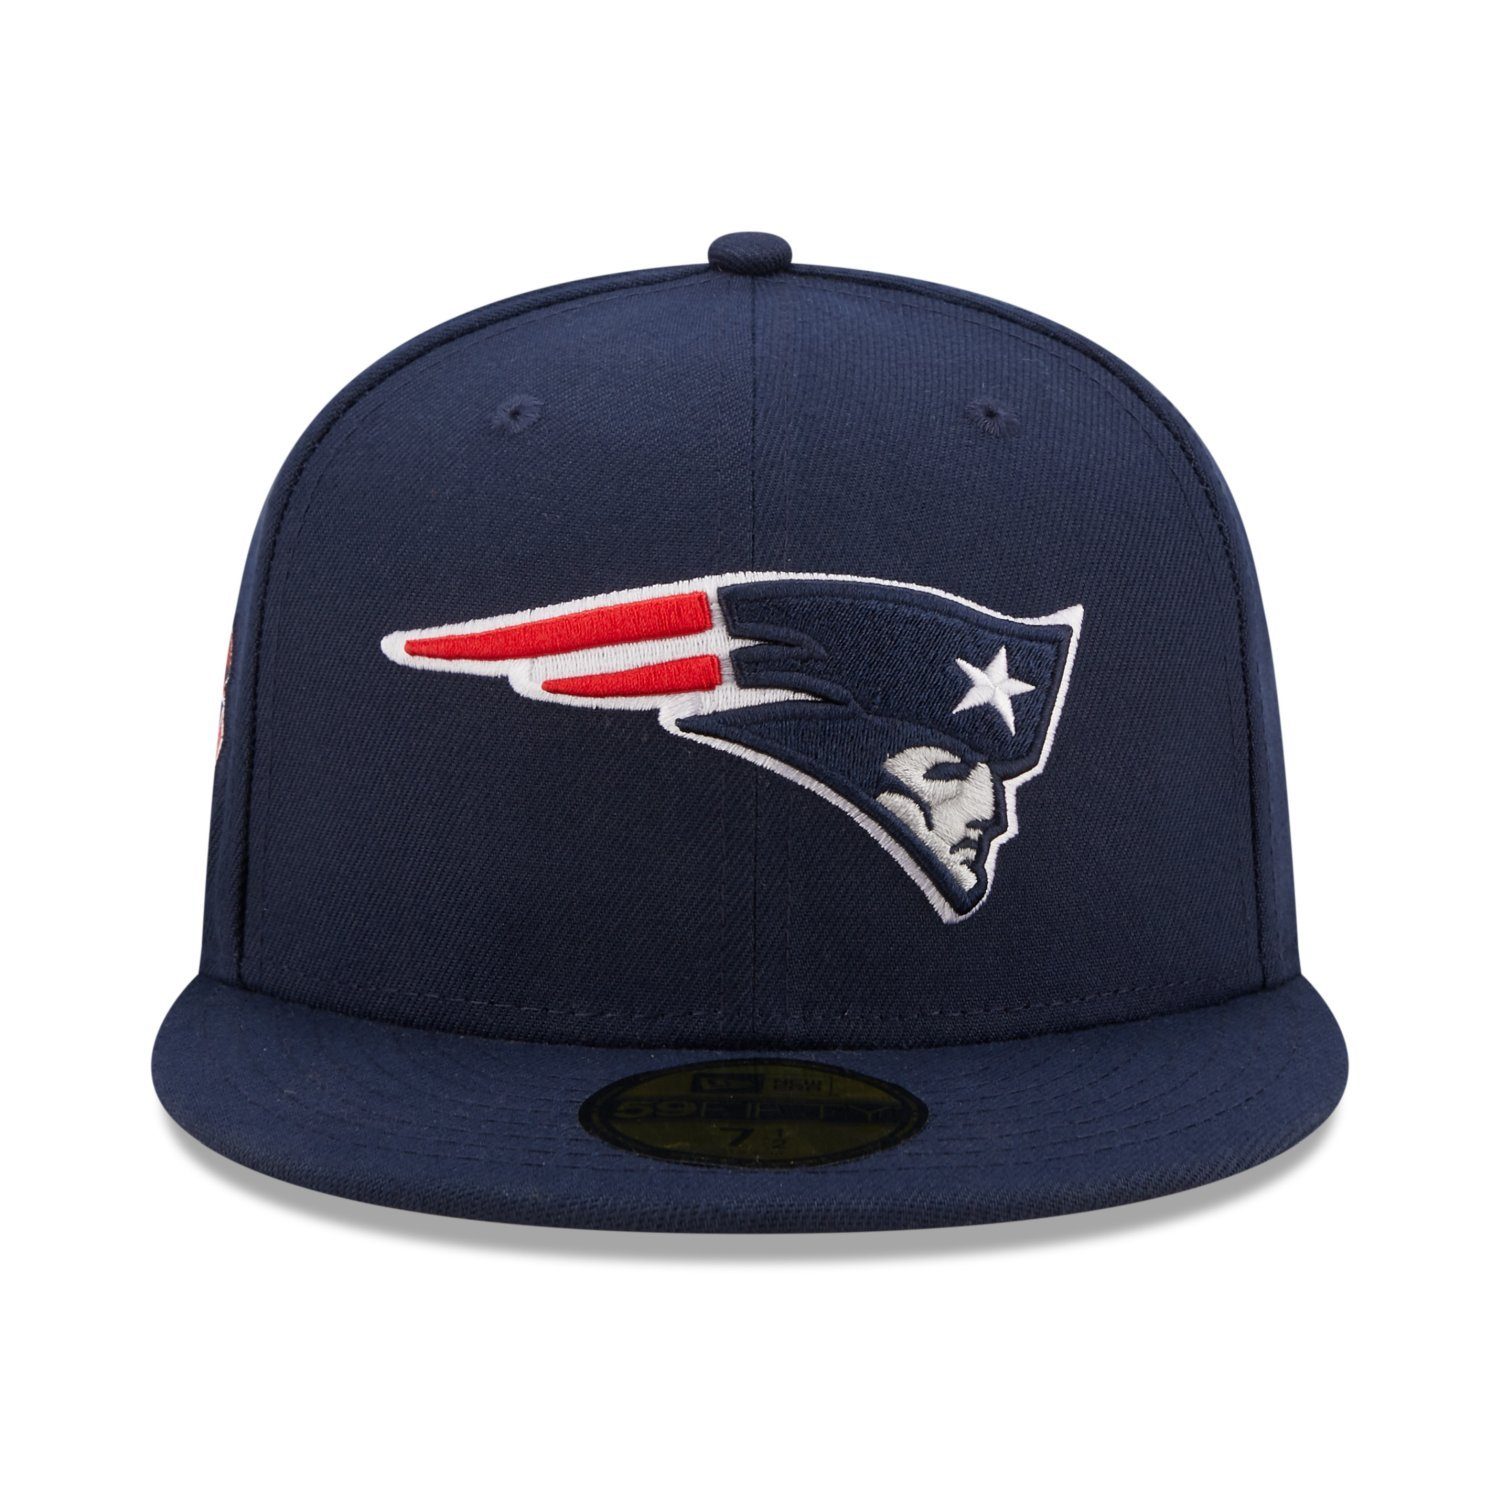 New SIDE Fitted Patriots Cap New England Era 59Fifty PATCH